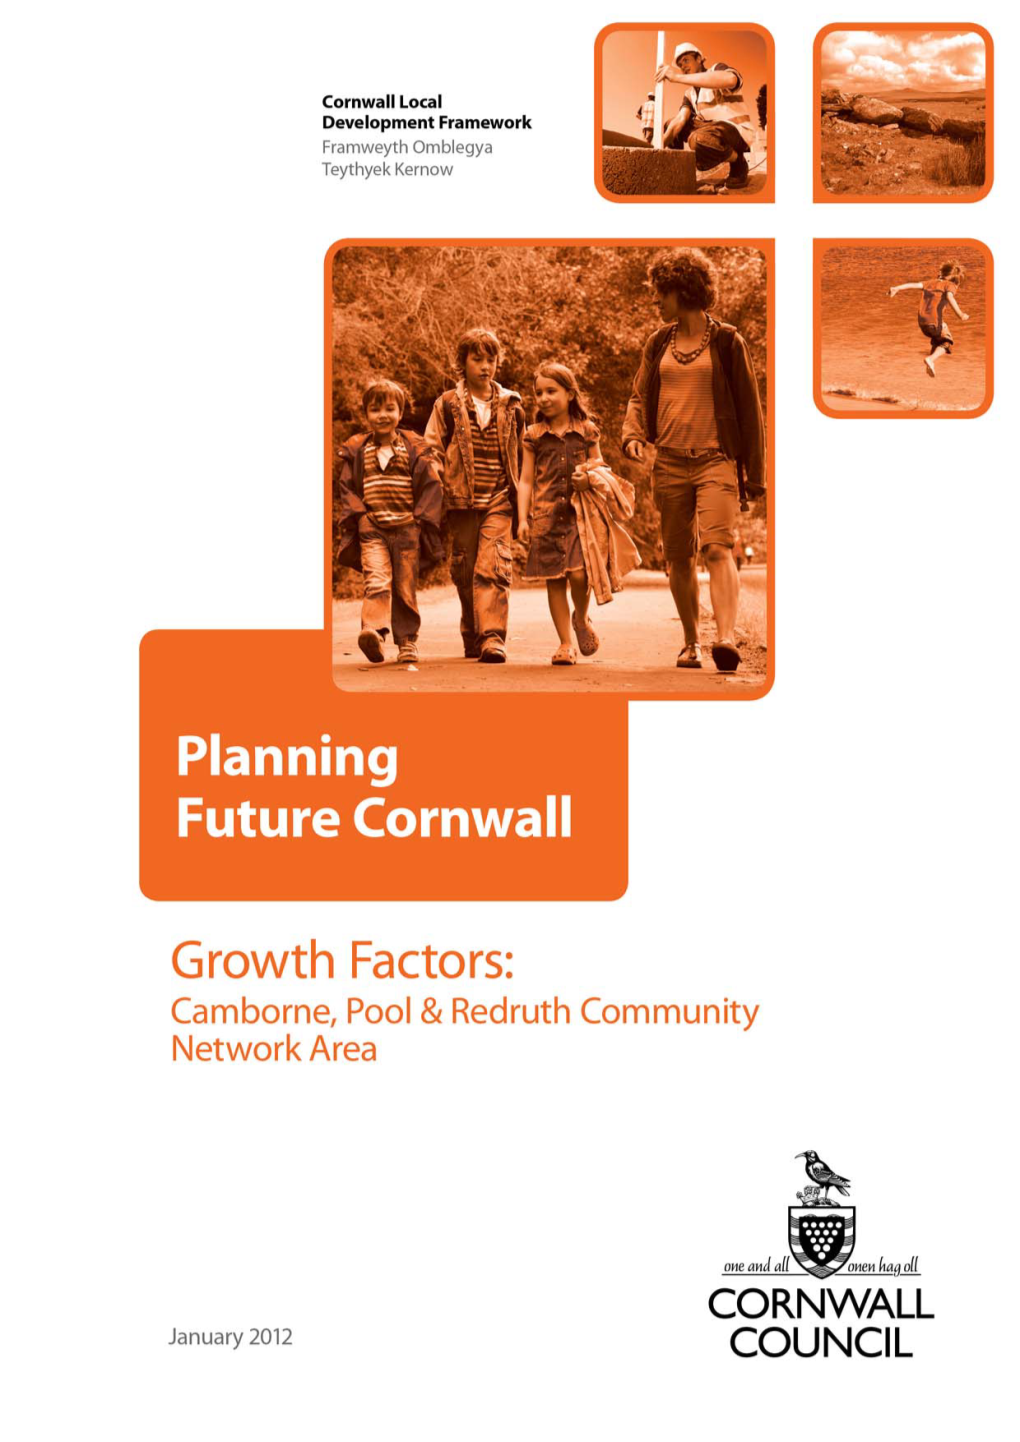 Camborne-Pool-And-Redruth-Growth